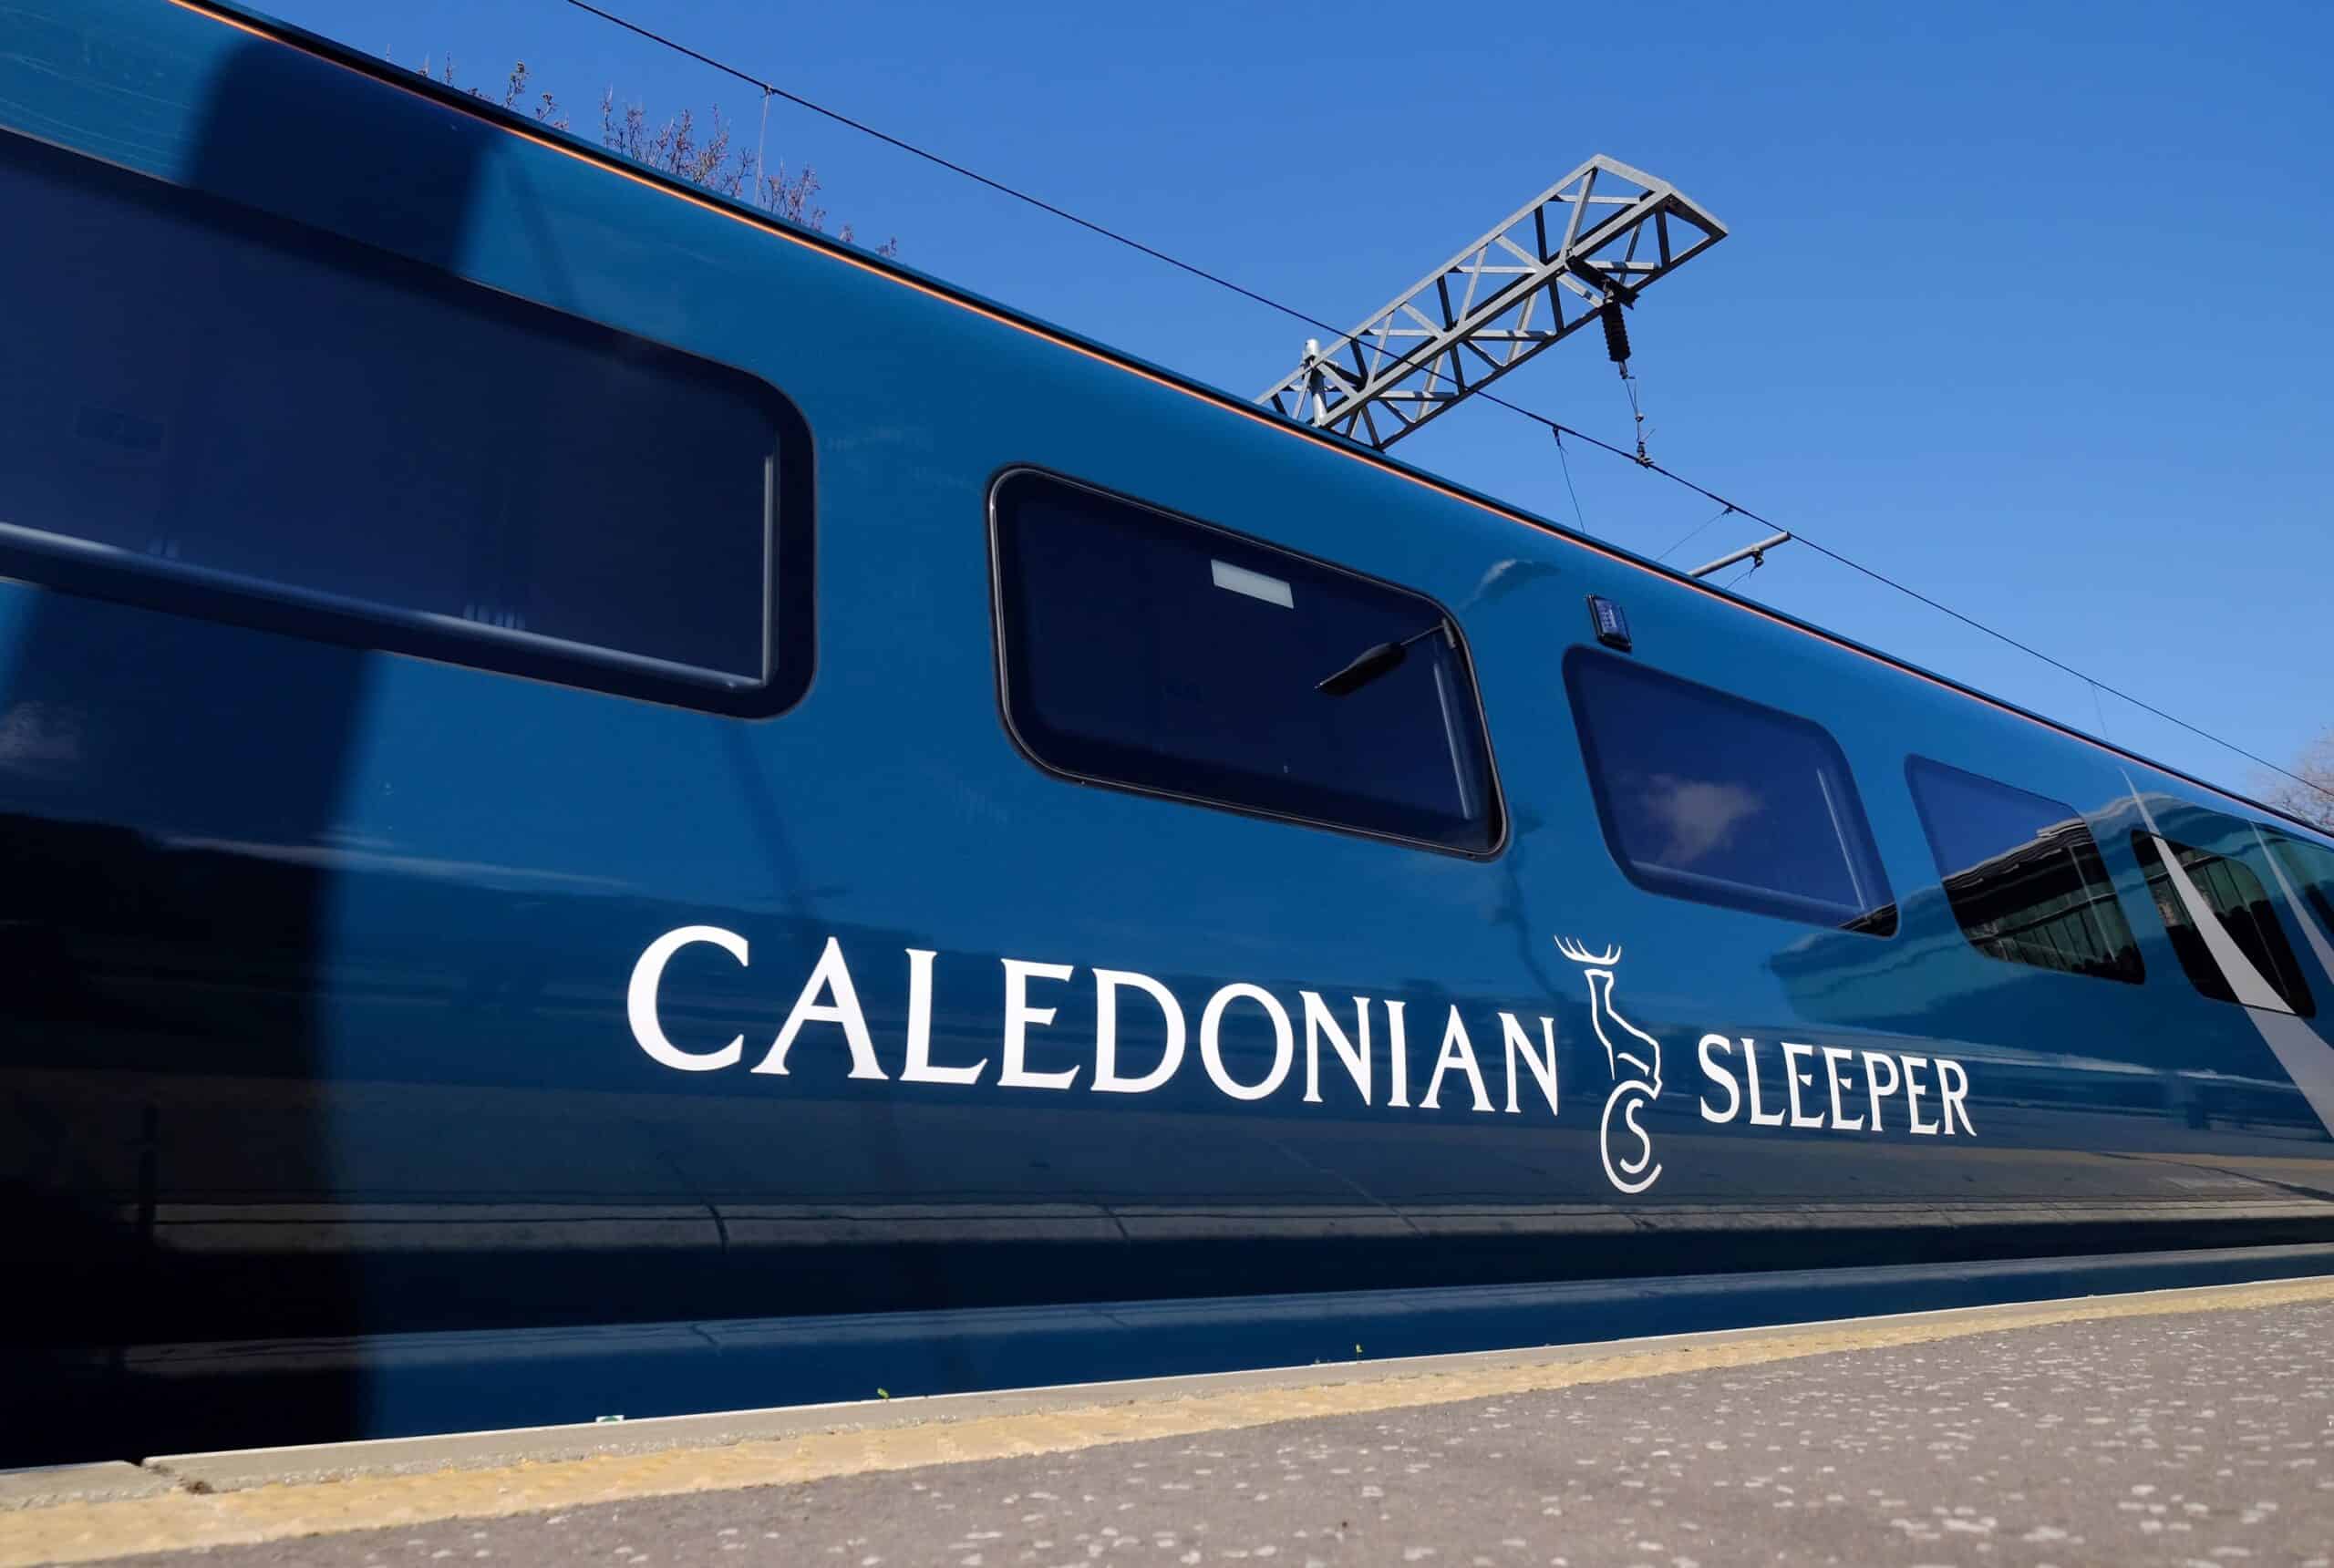 Super Caley goes public! Union win as sleeper service is nationalised